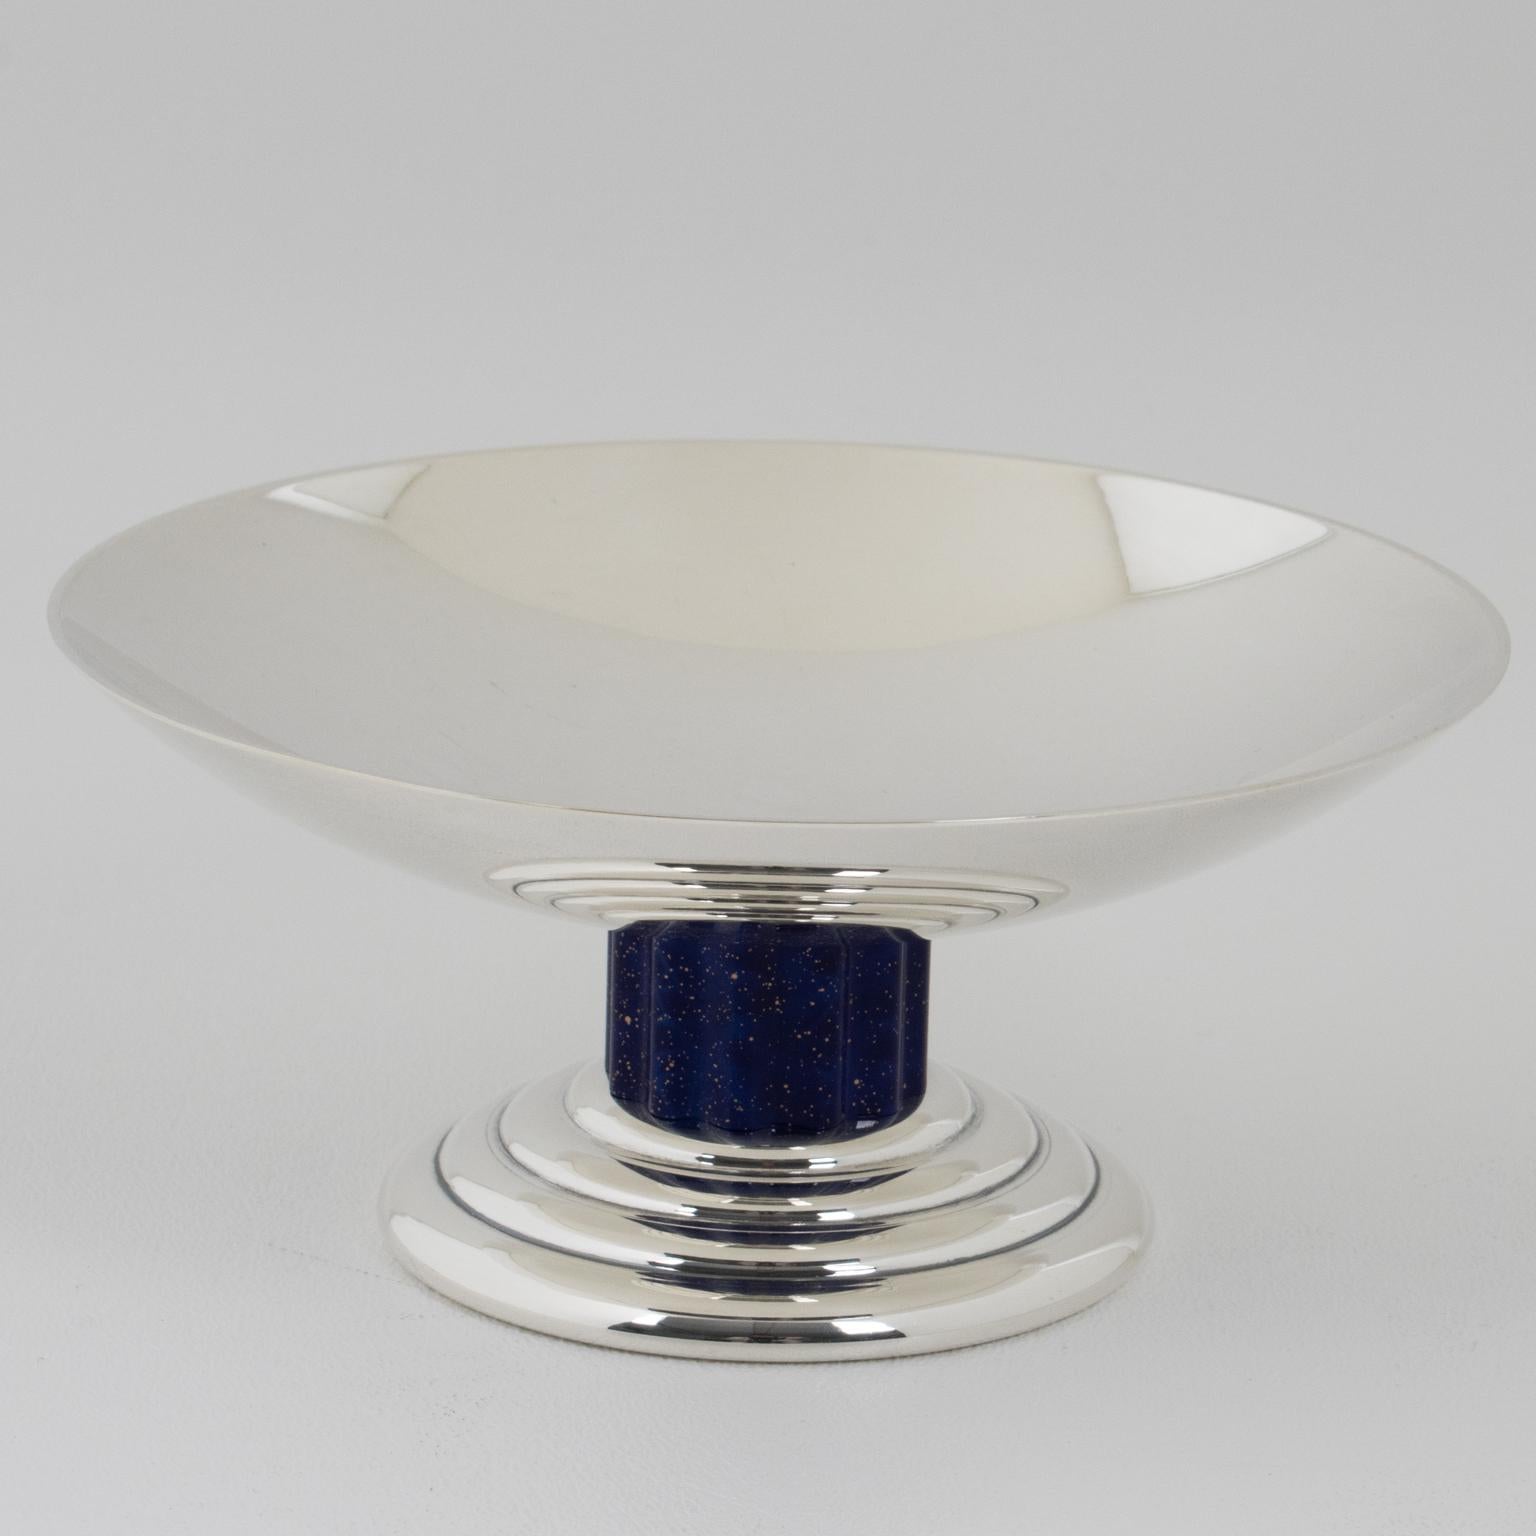 This lovely silver plate coupe, ring holder, bowl, or tazza was crafted by Puiforcat, France. Jean Puiforcat designed this elegant piece in the 1930s, the Art Deco period. Puiforcat France continued editing this collection until the 1970s. This